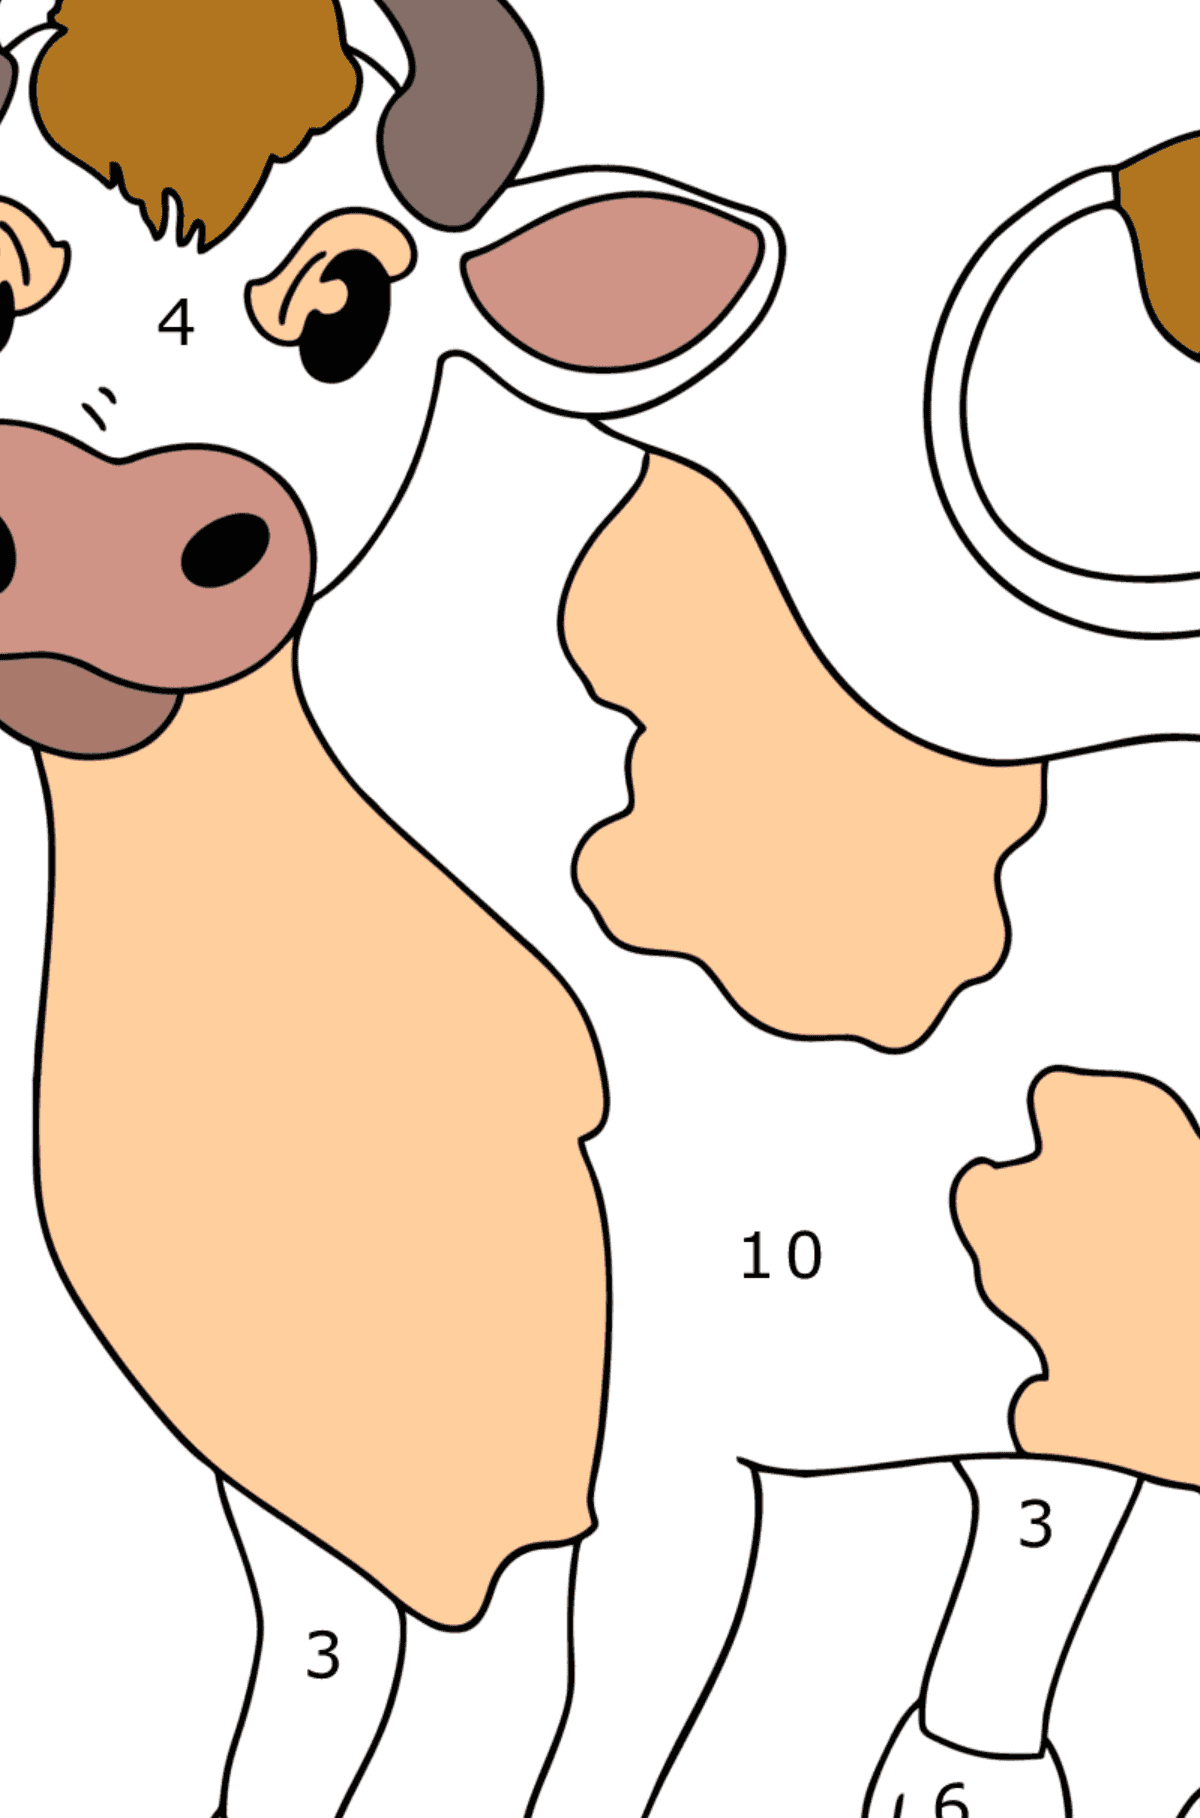 Gray bull coloring page - Coloring by Numbers for Kids